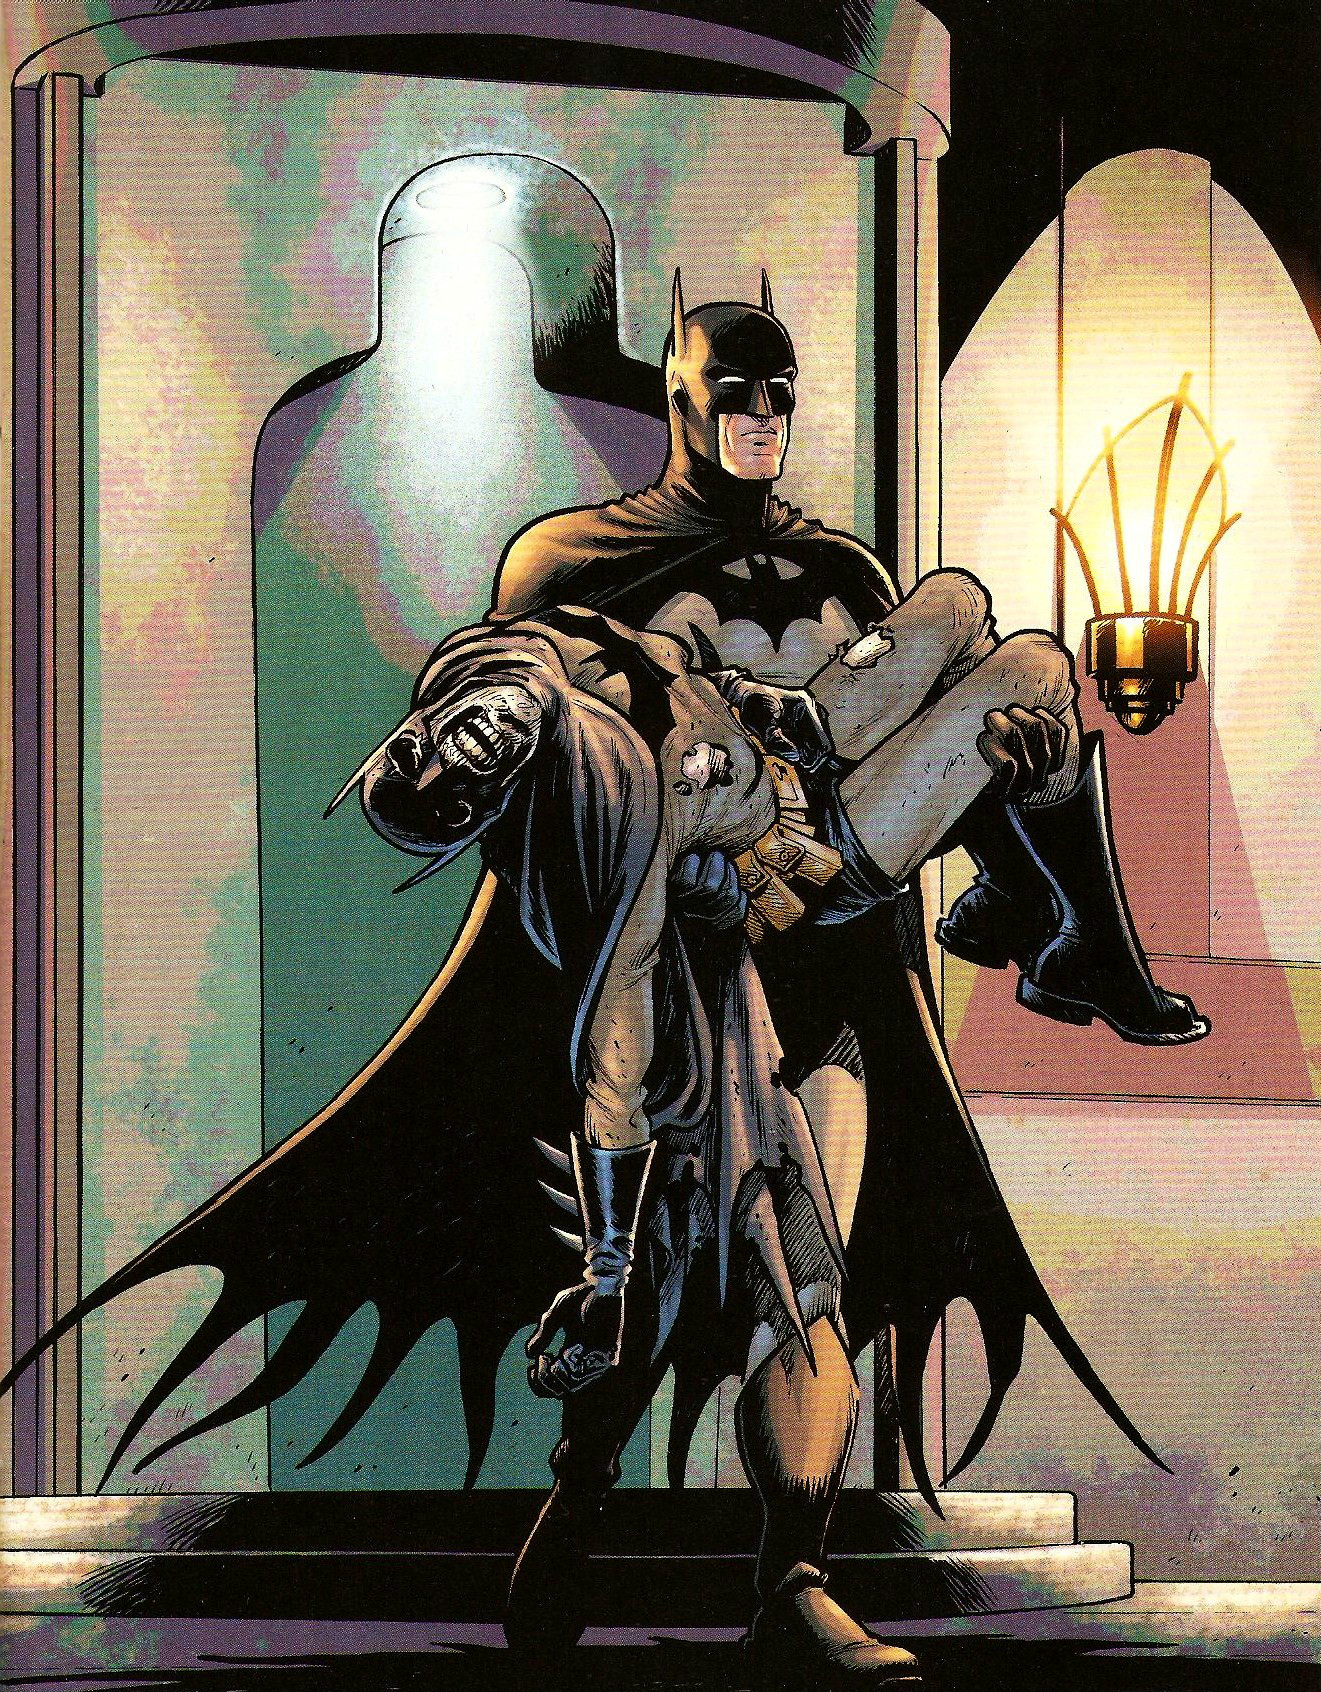 From Batman and Robin (Vol. 1) #7 (2010)